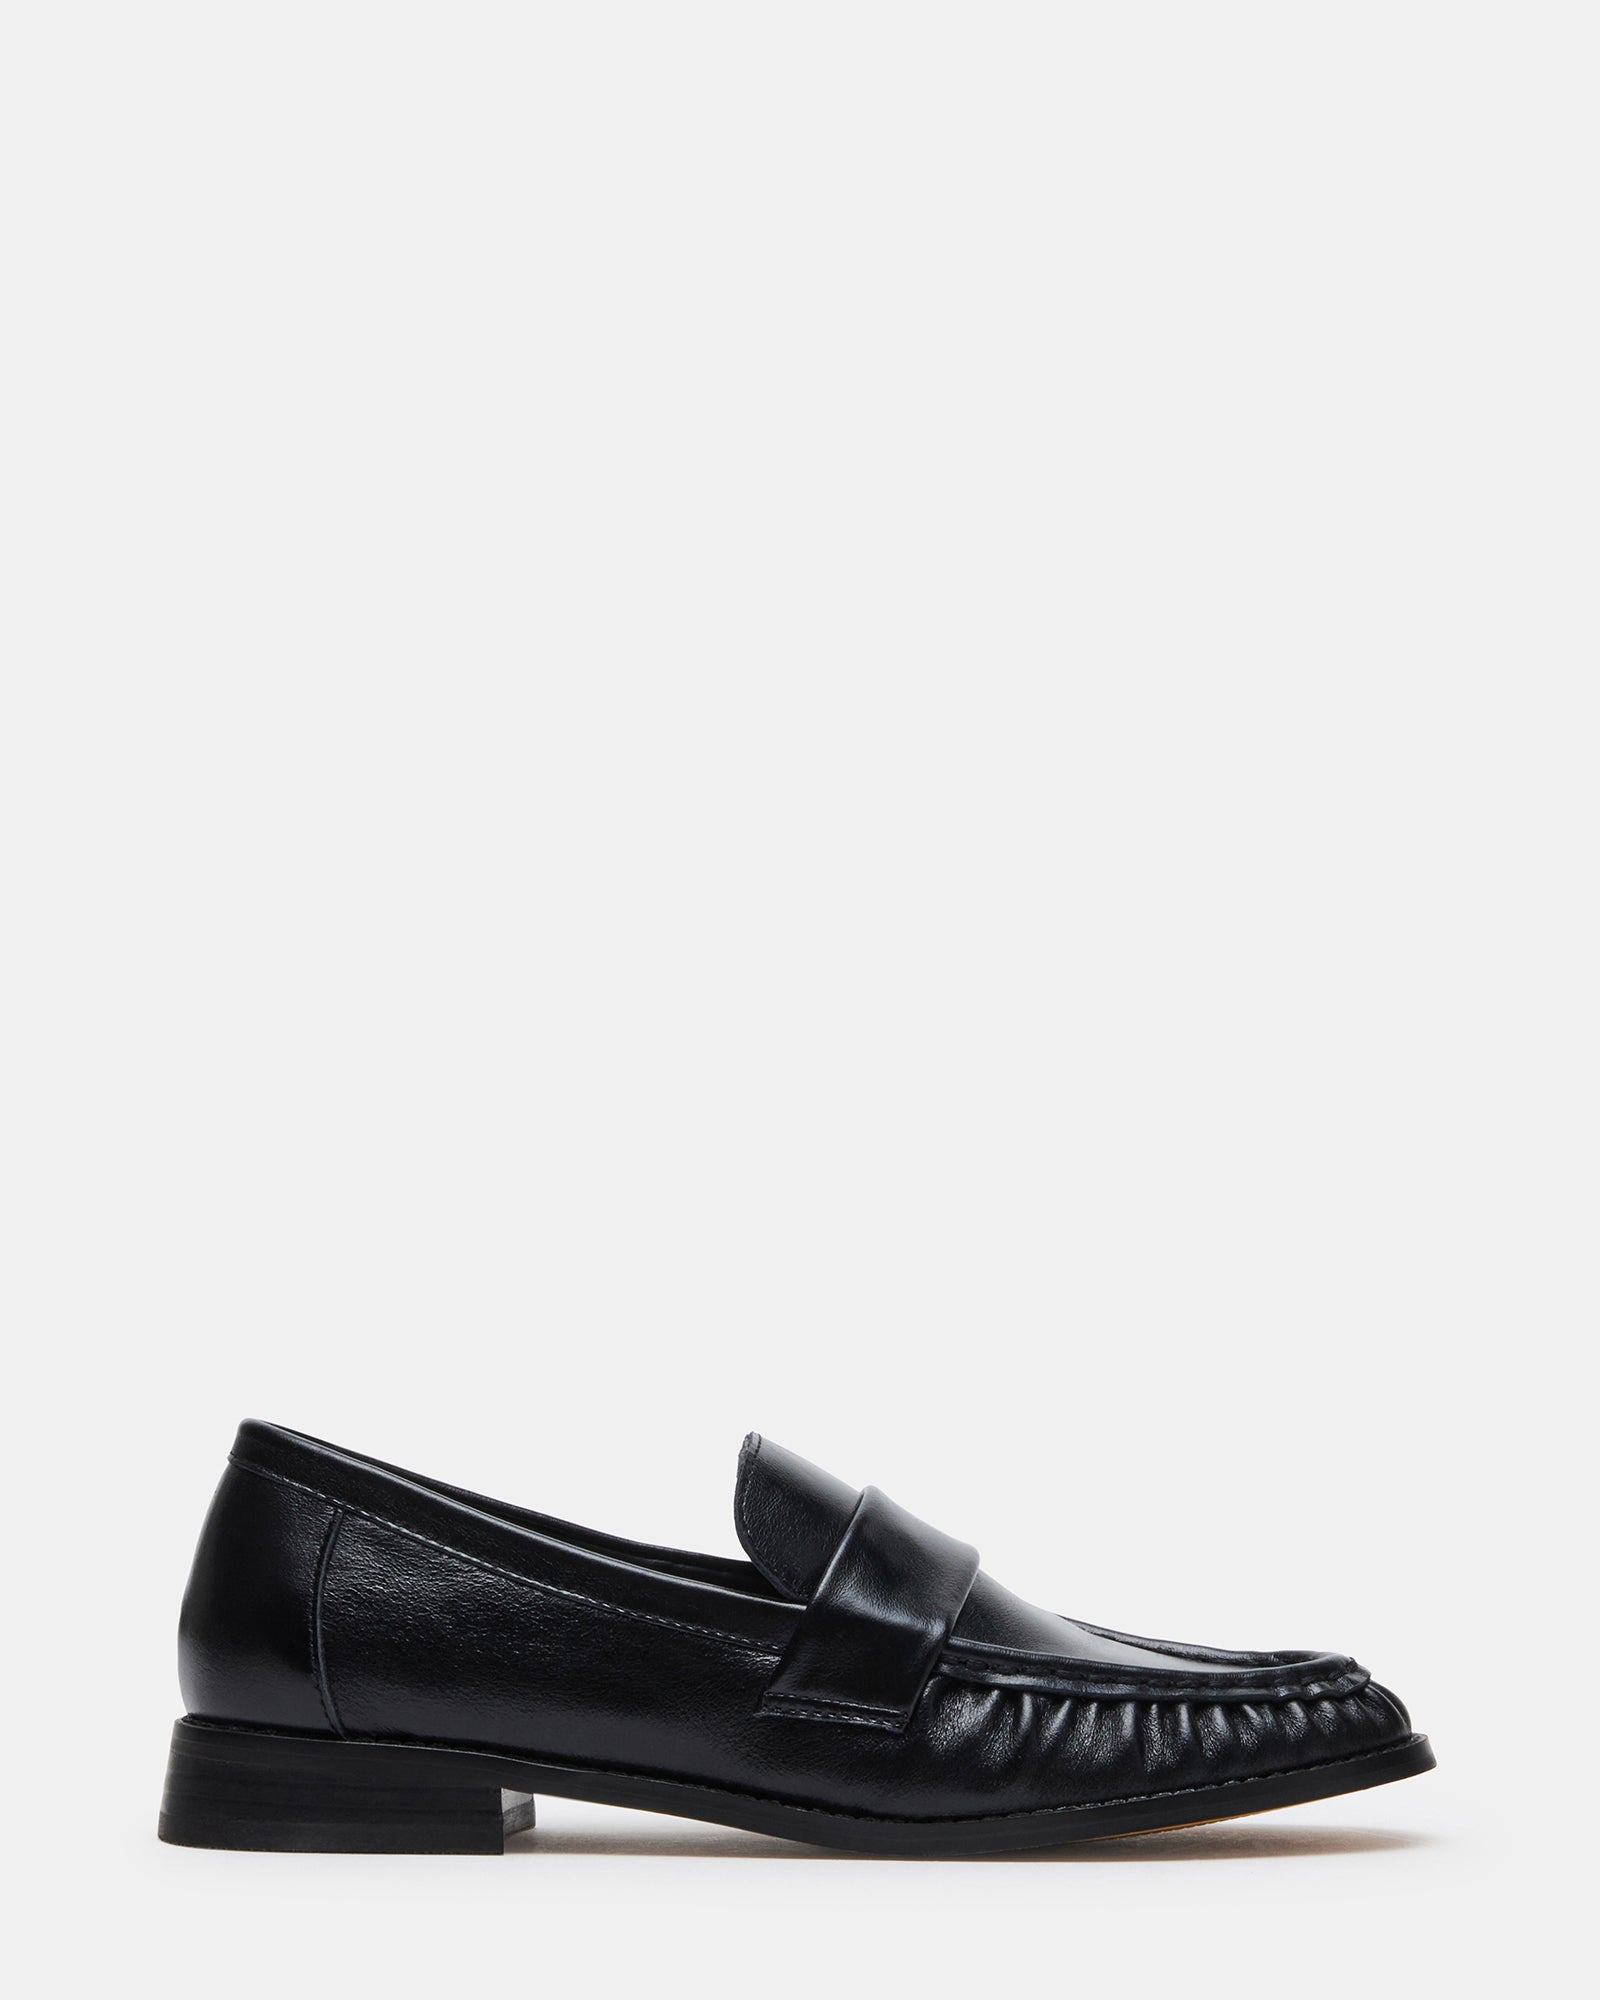 RIDLEY Black Leather Tailored Loafer | Women's Loafers – Steve Madden